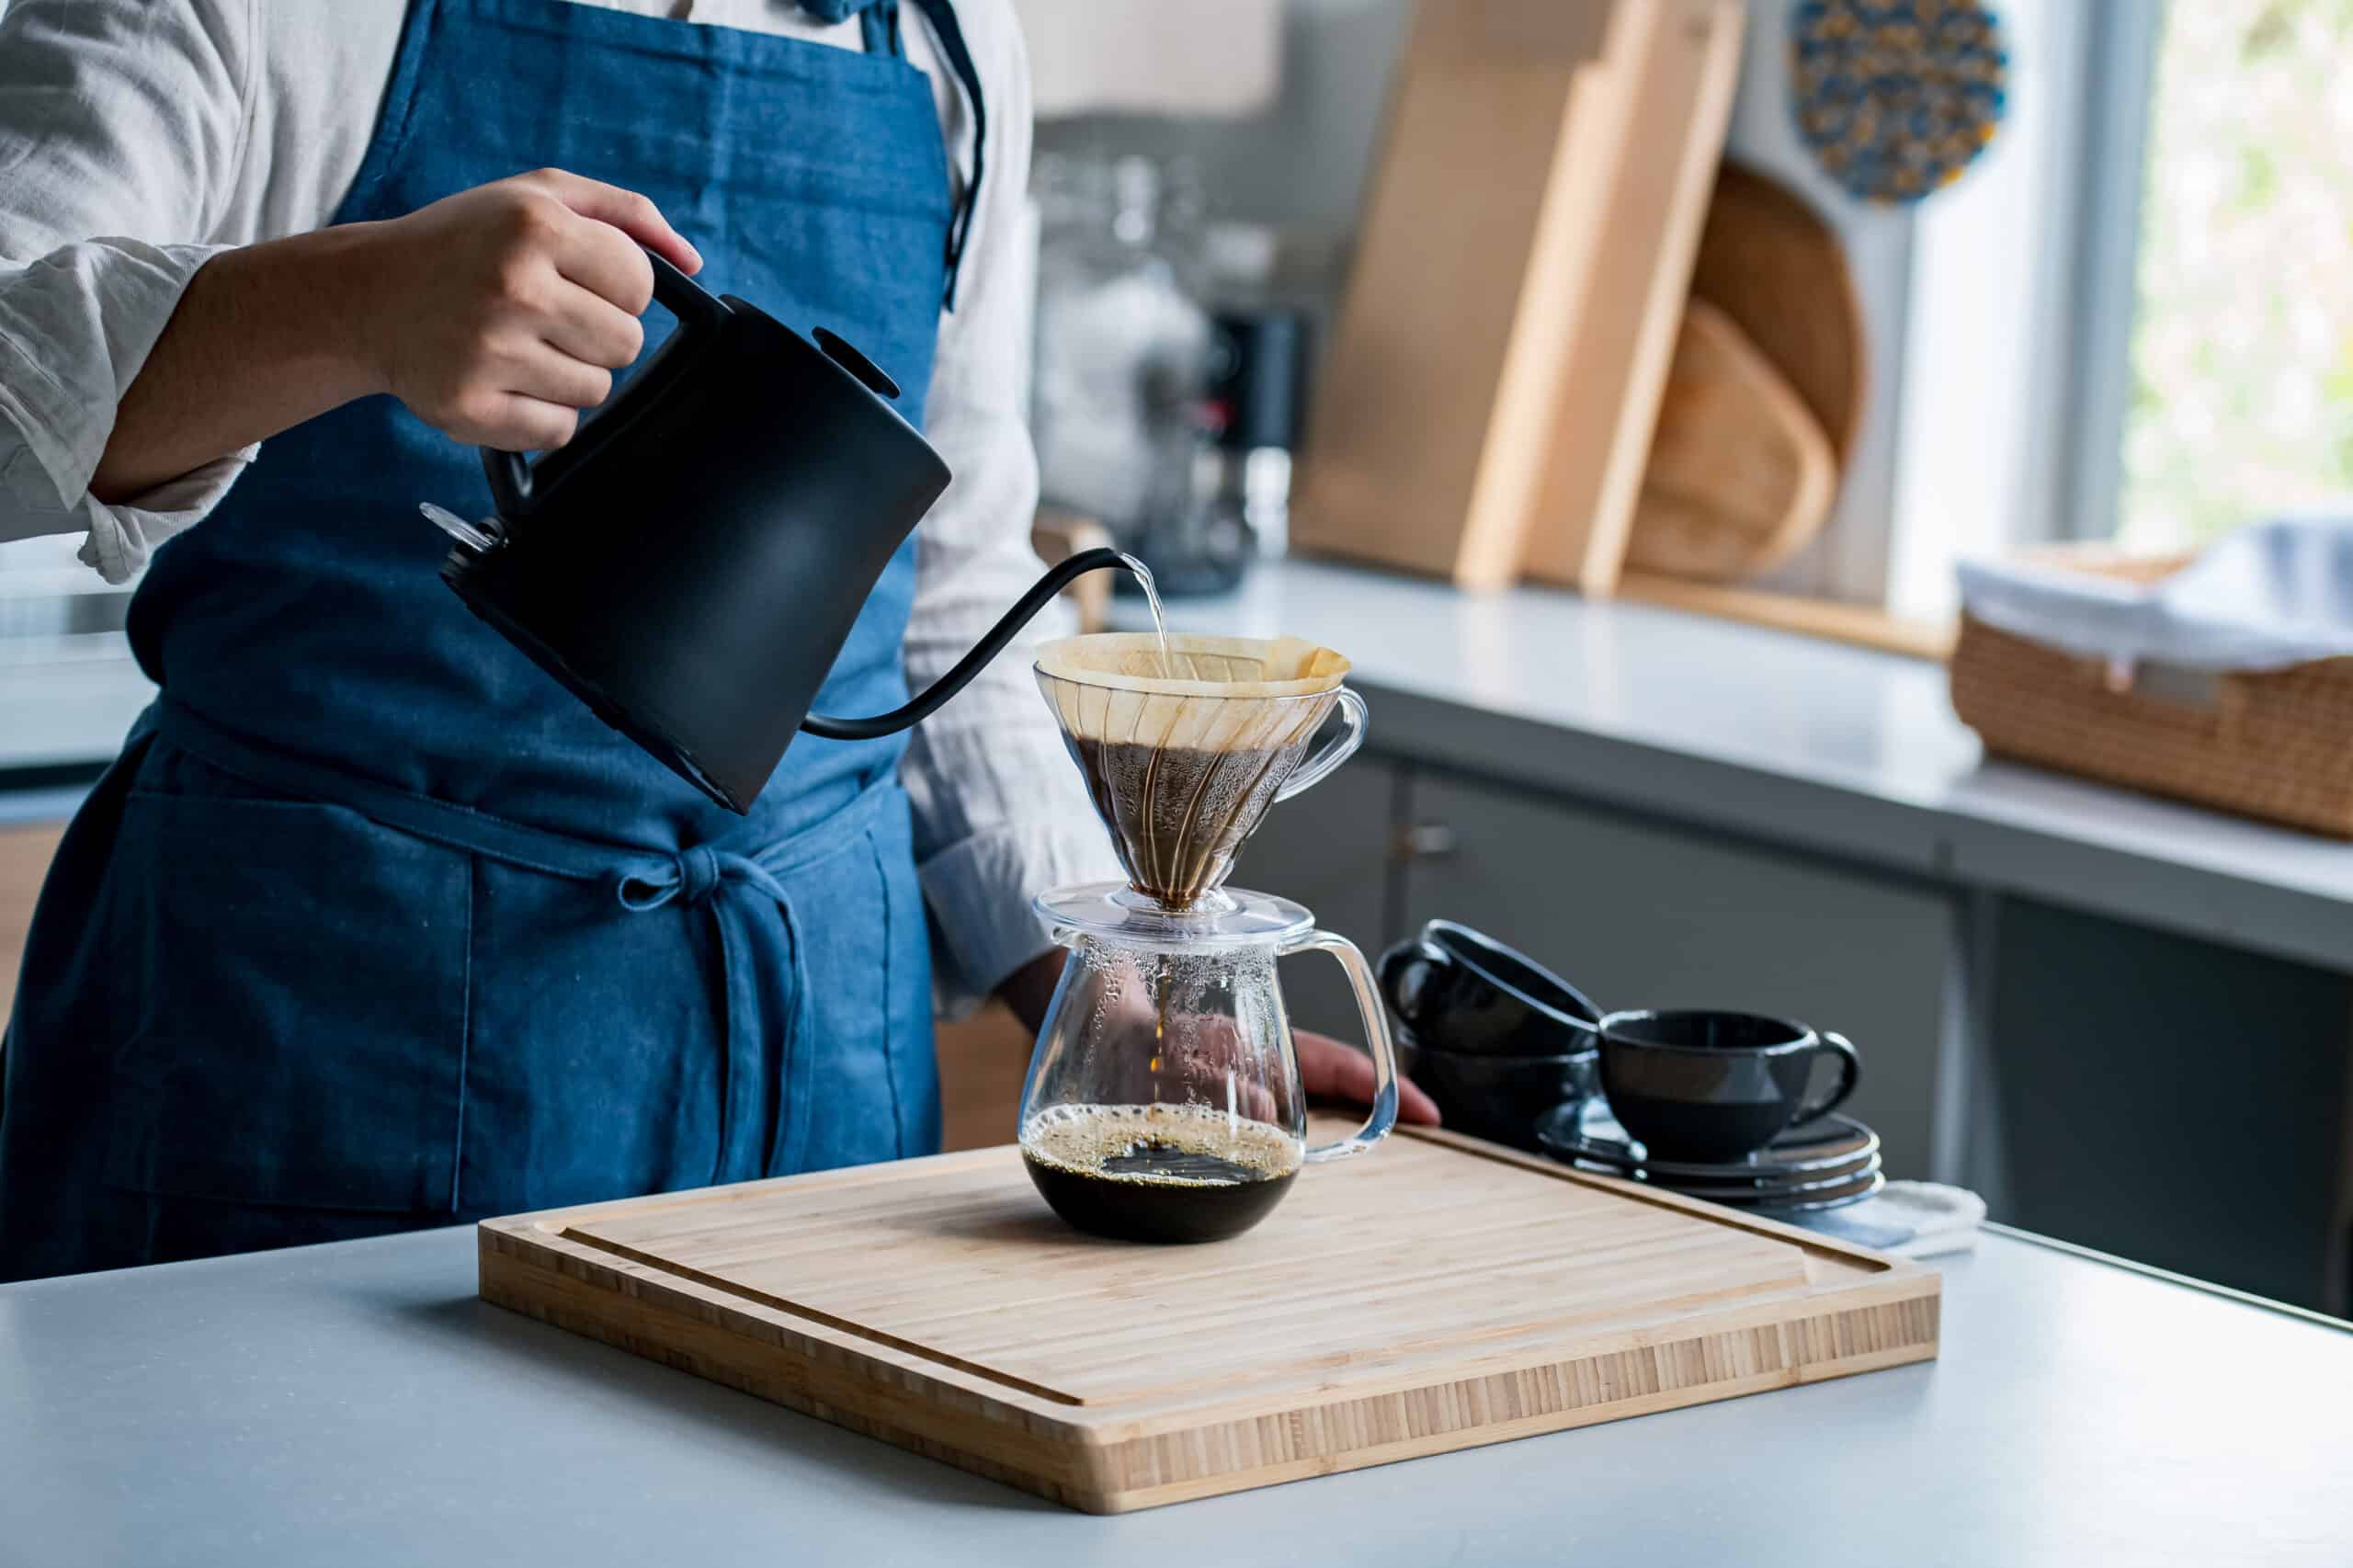 Man making coffee in the kitchen. Delicious coffee image. Coffee or caffeine can help potentiate kratom's effects.